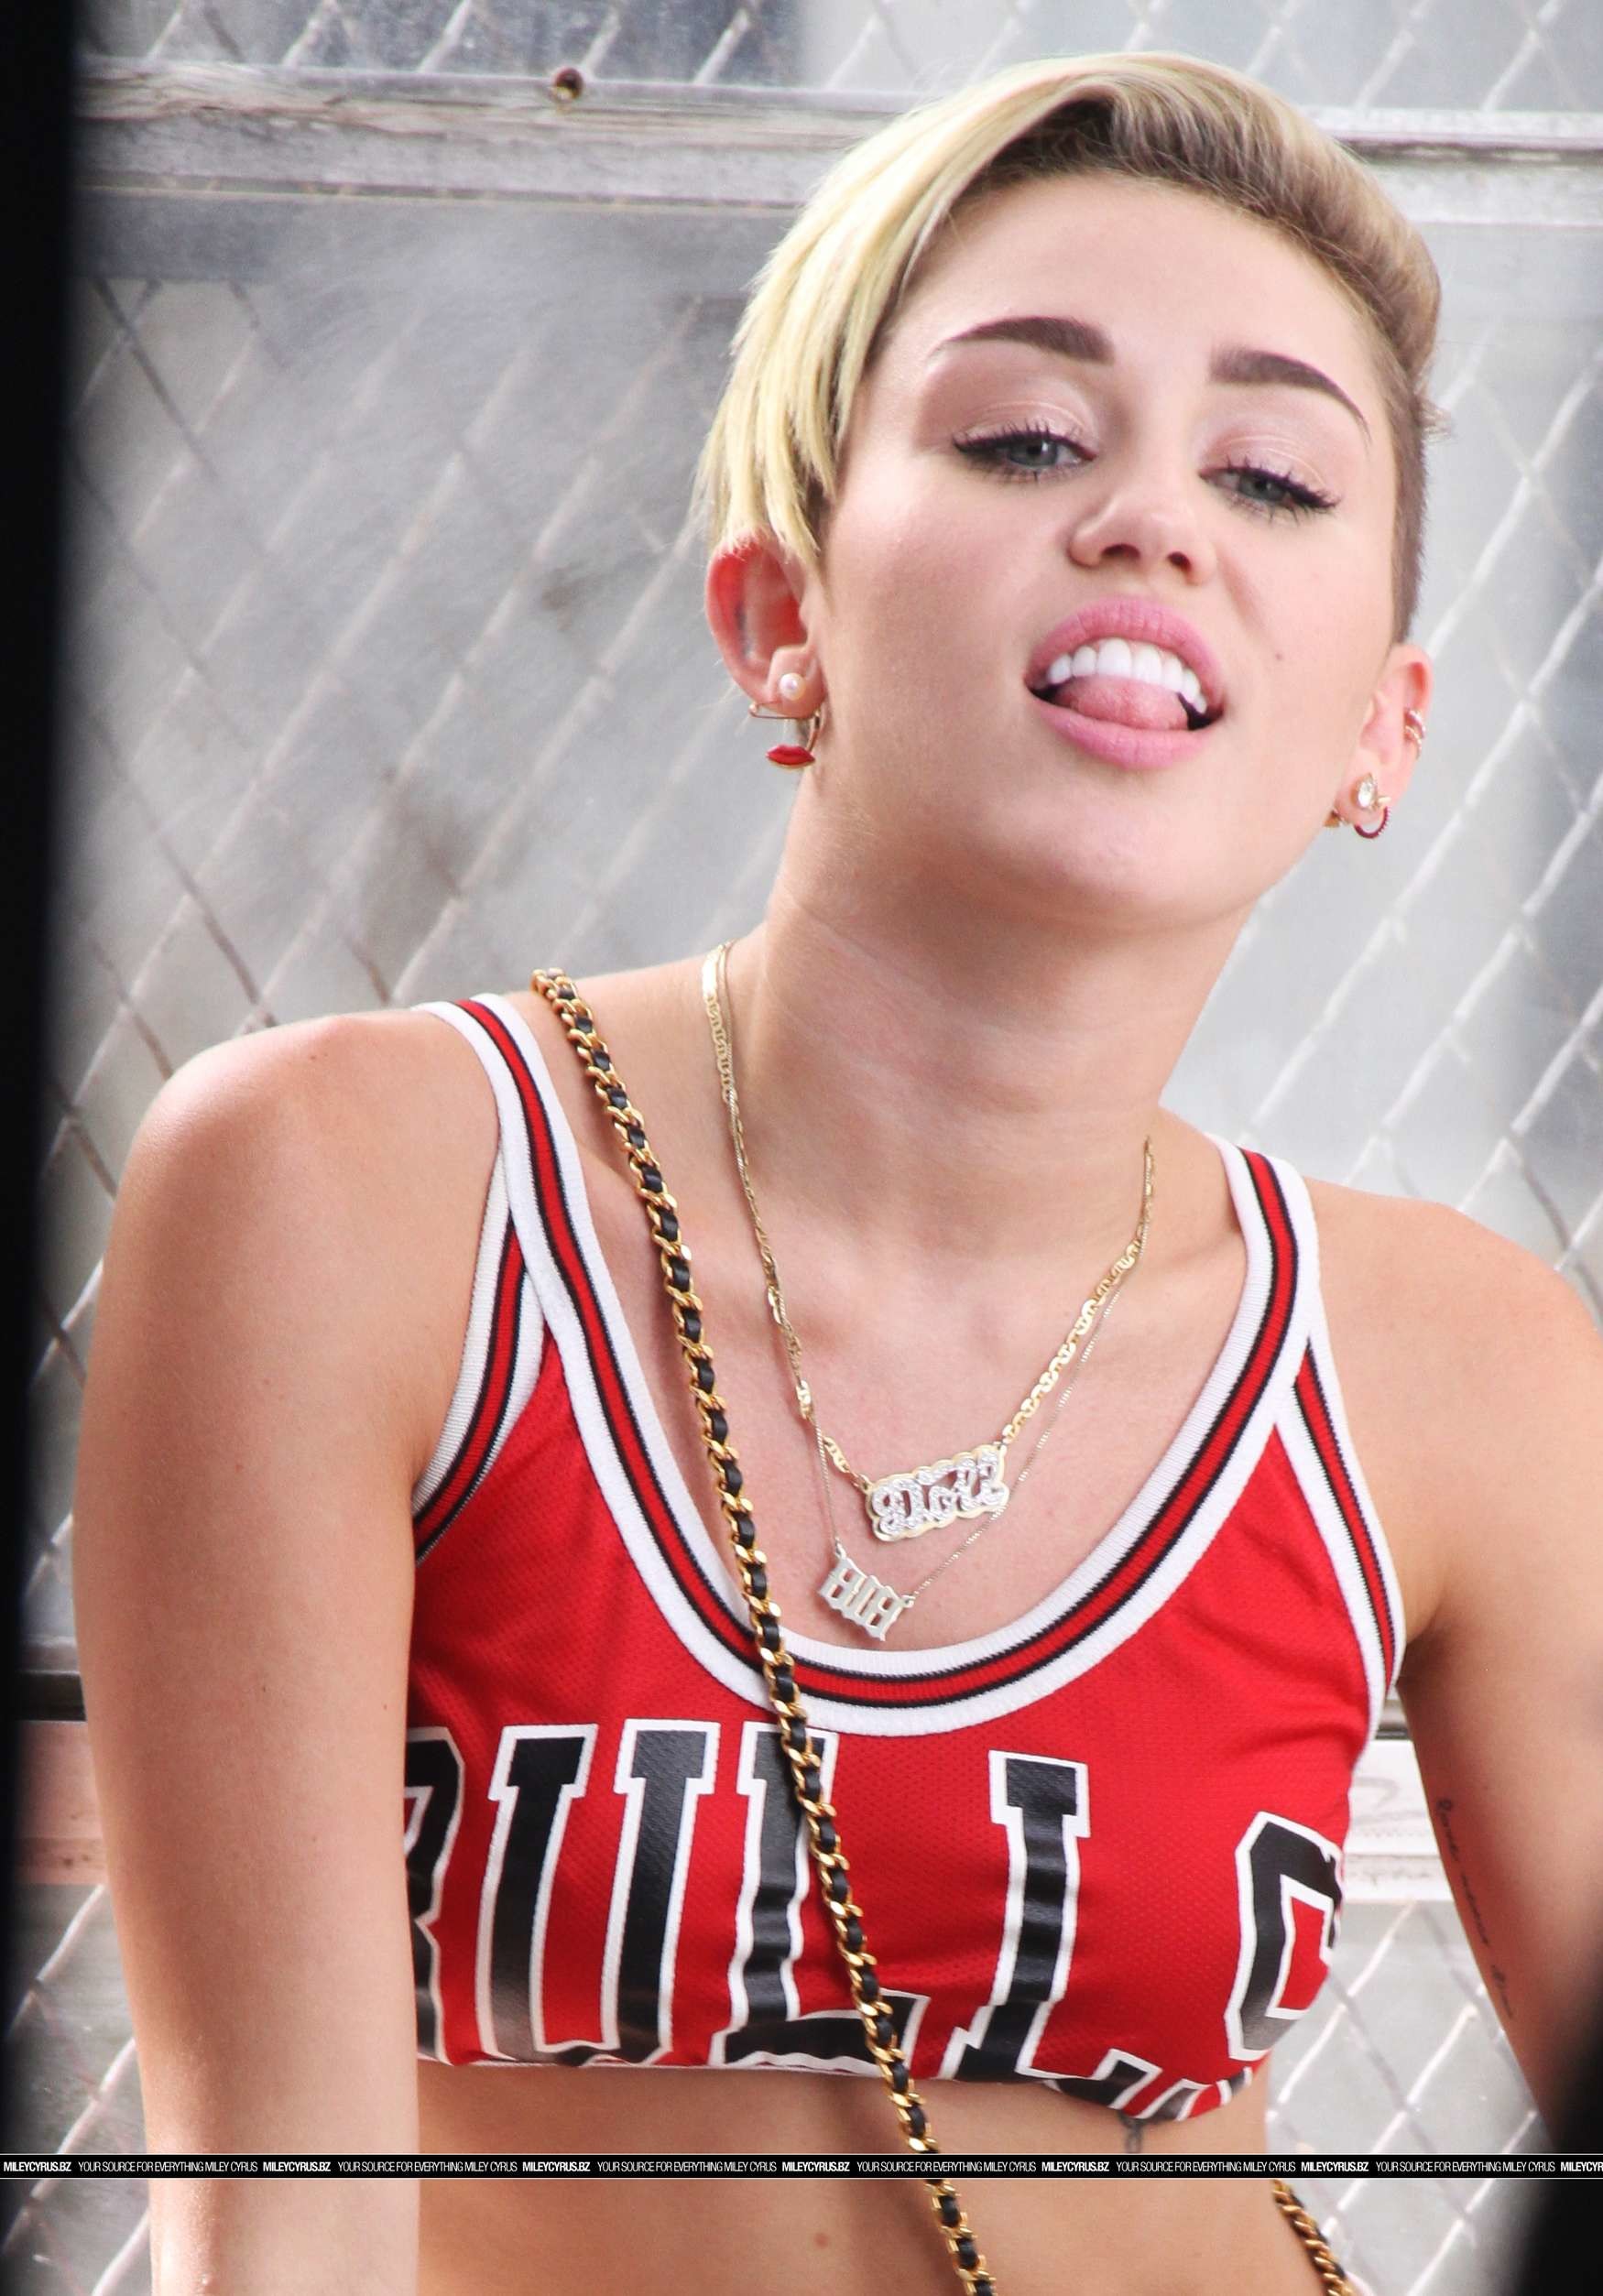 1750x2507 Miley Cyrus – 23 Music Video Portraits -16 - Full Size